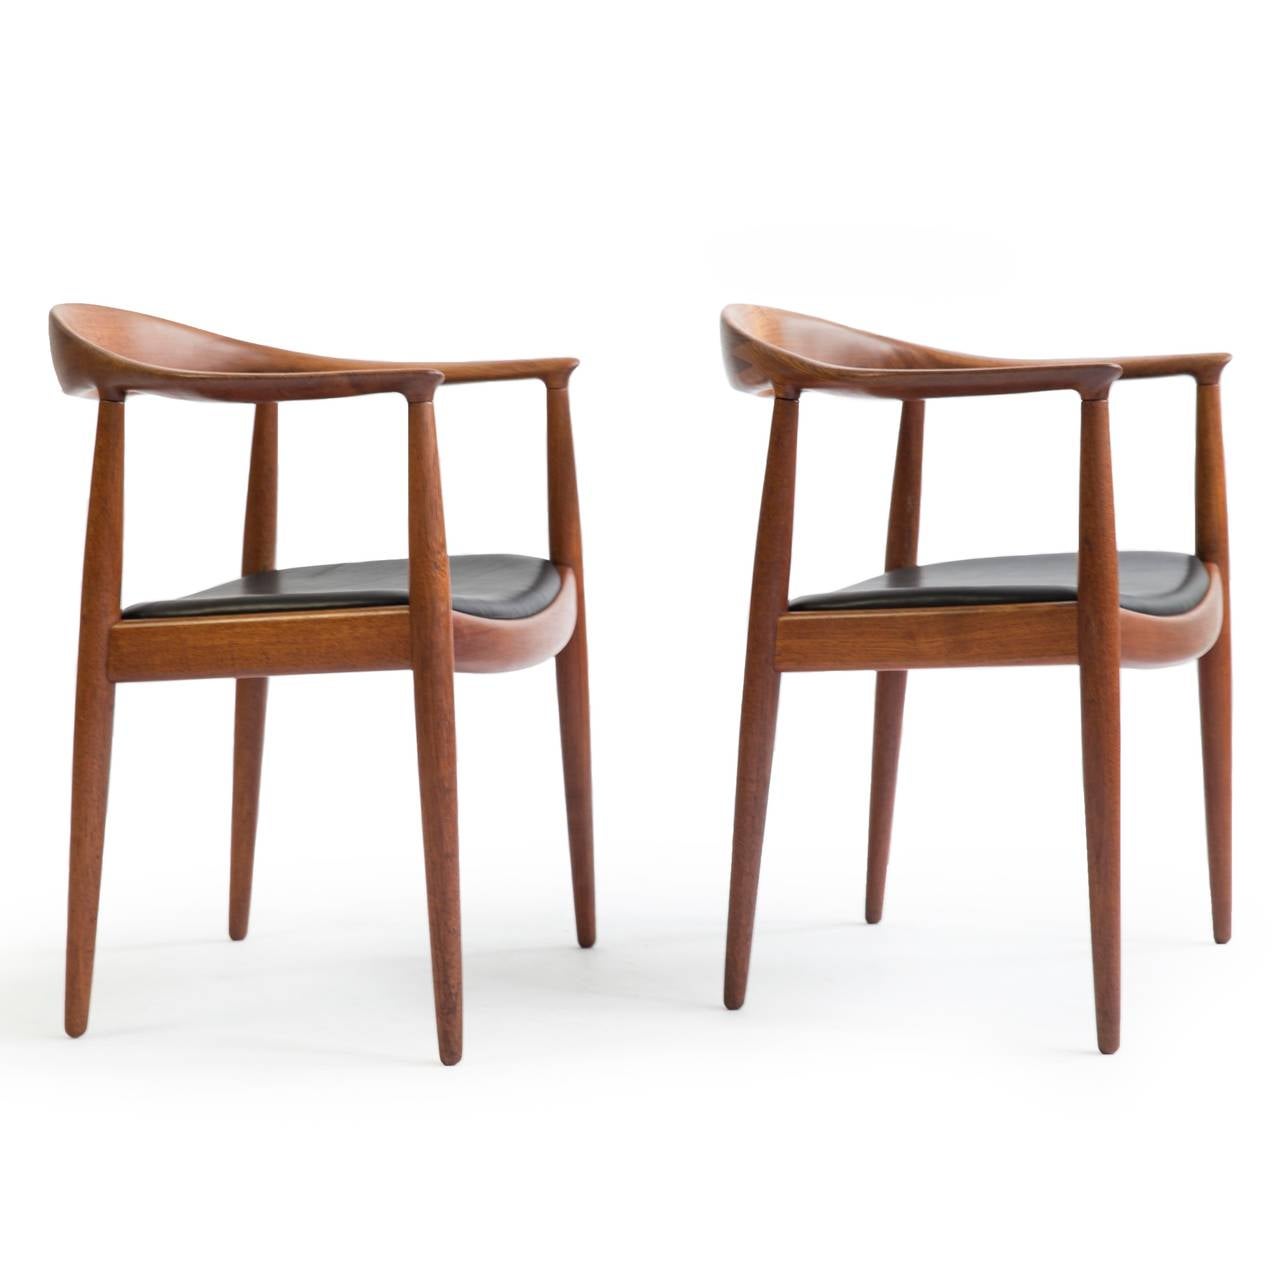 A pair of Hans J. Wegner 'The chairs' with teak frame and black leather seats. 

Designed by Hans Wegner 1949, manufactured and burn marked by Cabm. Johannes Hansen, Denmark, model JH503.

Beautiful condition.